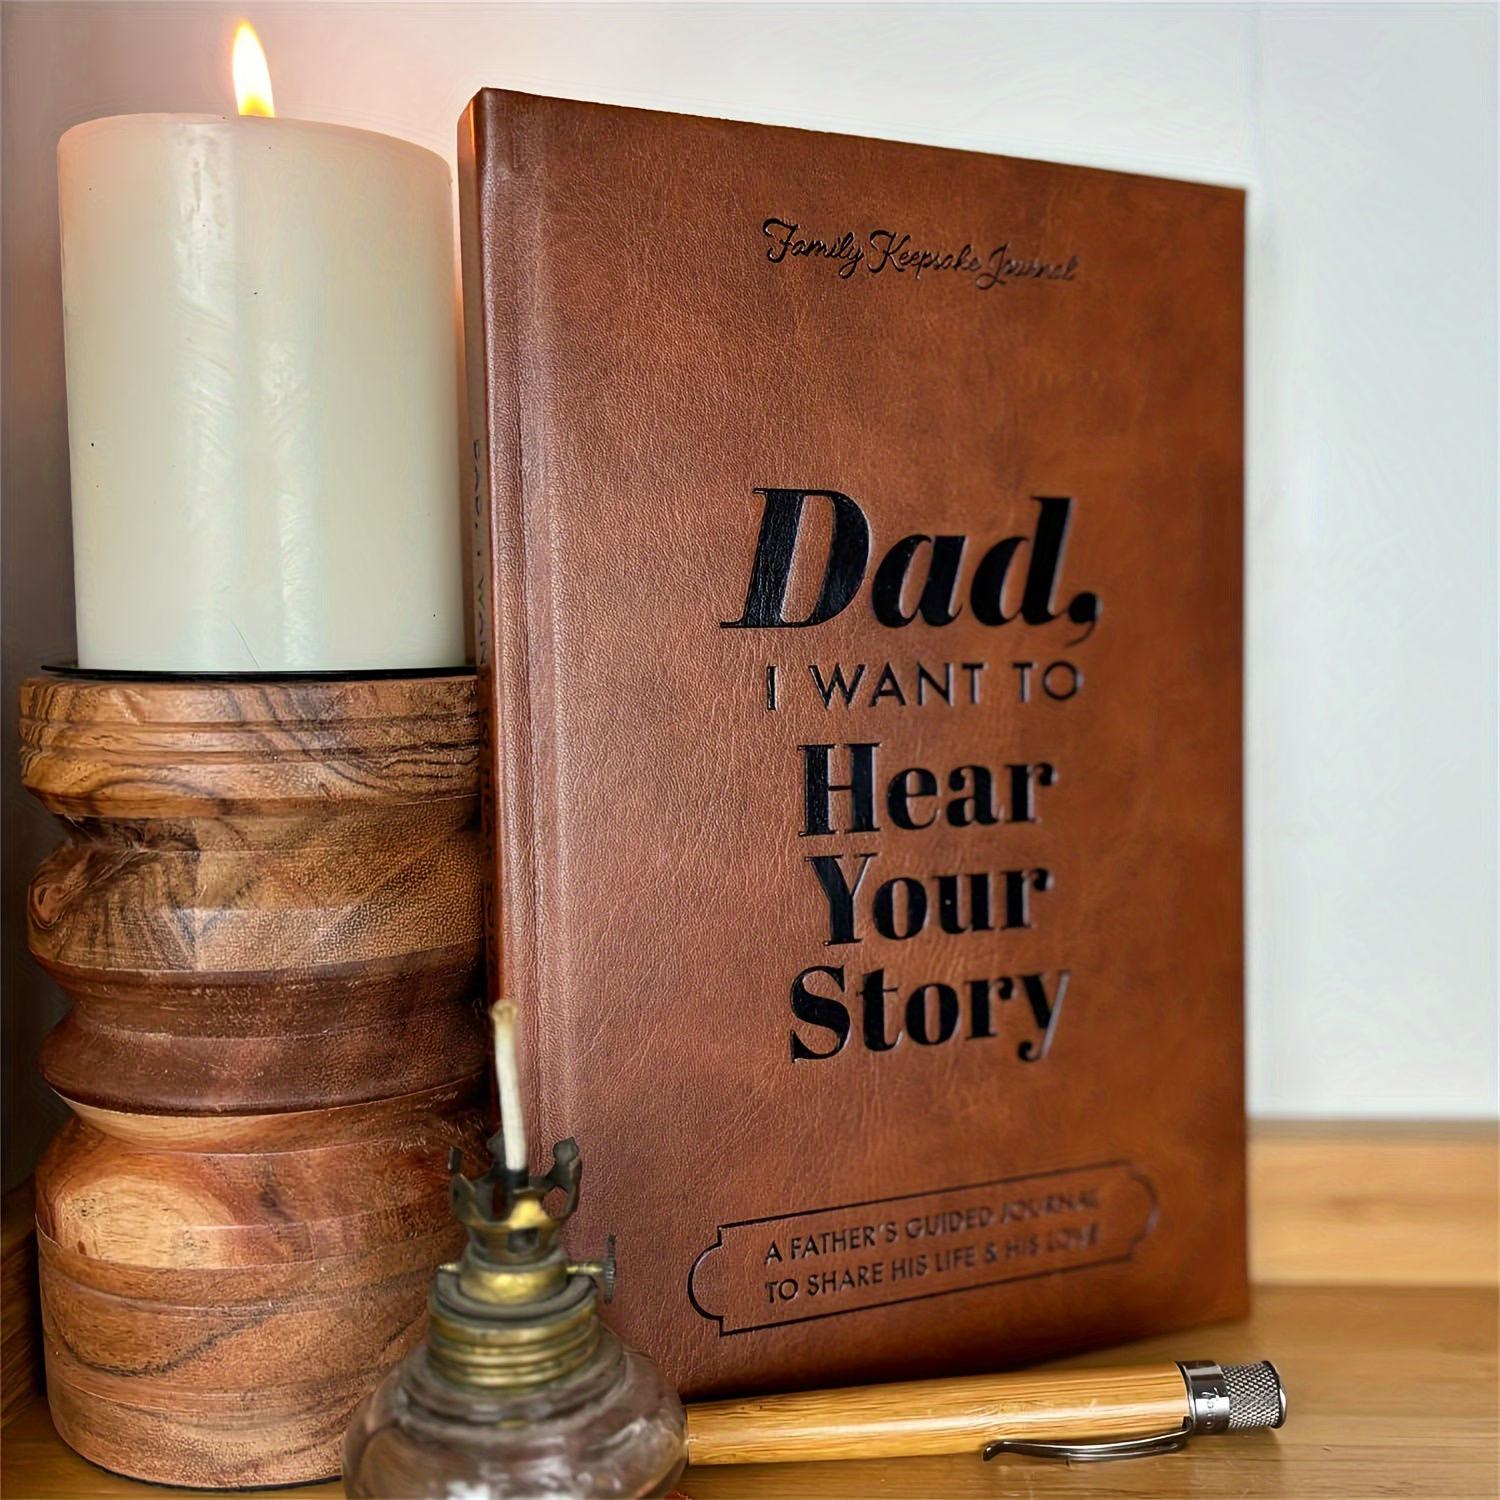 

Father's Guided Journal: Dad, I Want To Hear Your Story - A Personalized Diary For Sharing